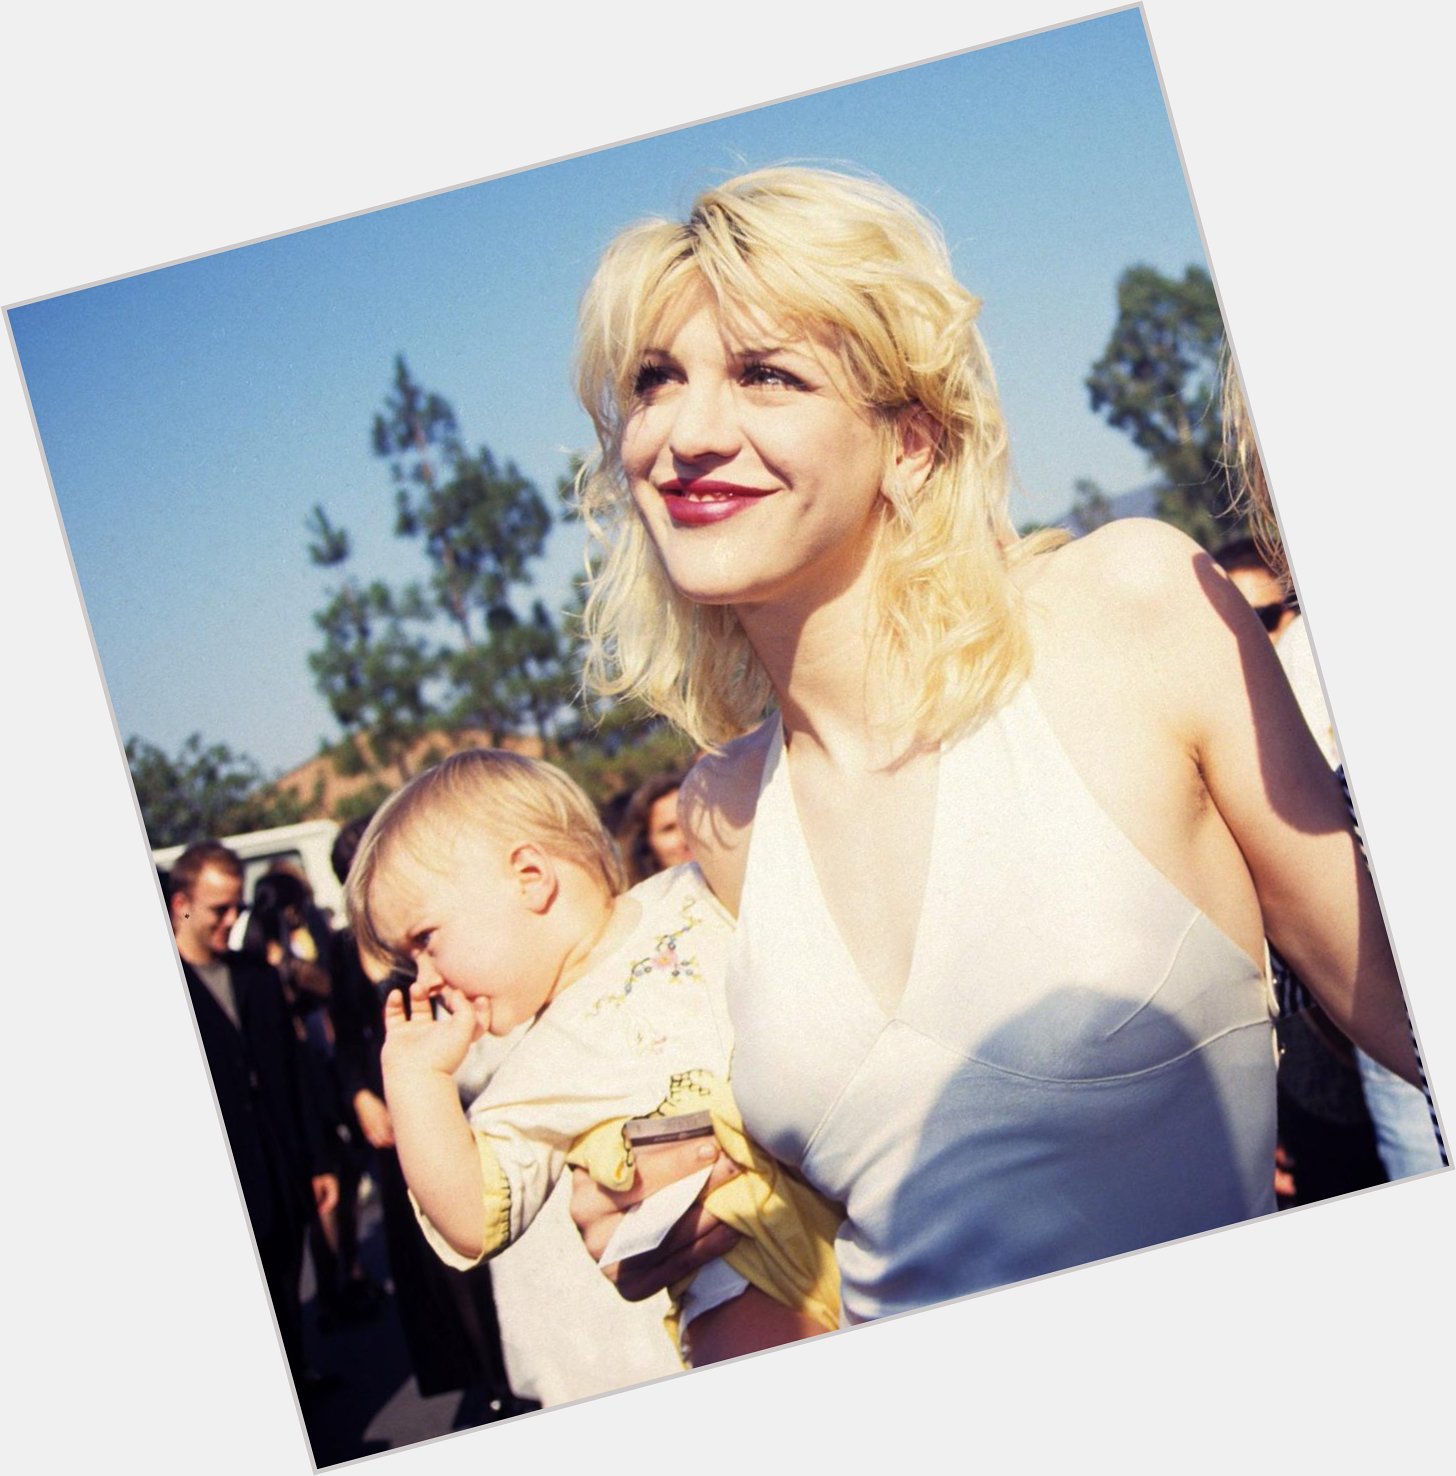 Happy birthday Courtney Love! Cheers to an inspiring woman.
--> 

© Getty Images 